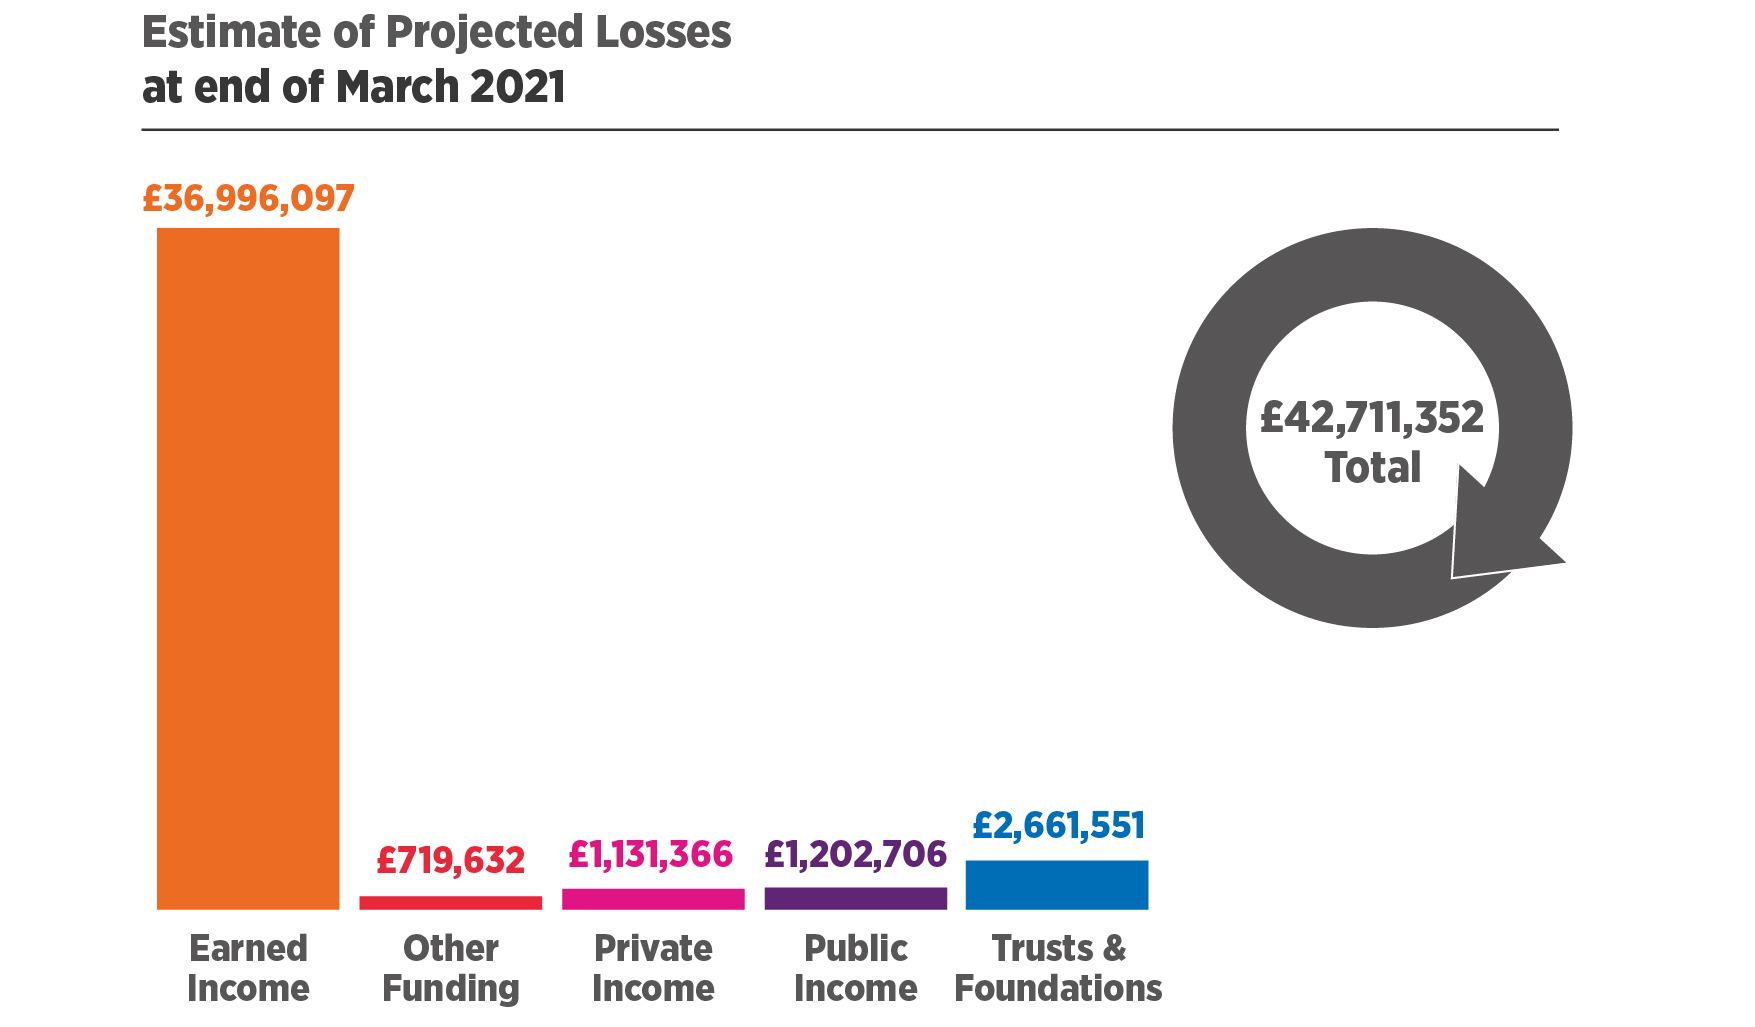 Estimate of Projected Losses at end of March 2021.   Earned Income = £36,996,097, Other Funding = £719,632, Private Income = £1,131,366, Public Income = £1,202,706, Trusts & Foundations = £2,661,551. £42,711,352 Total 